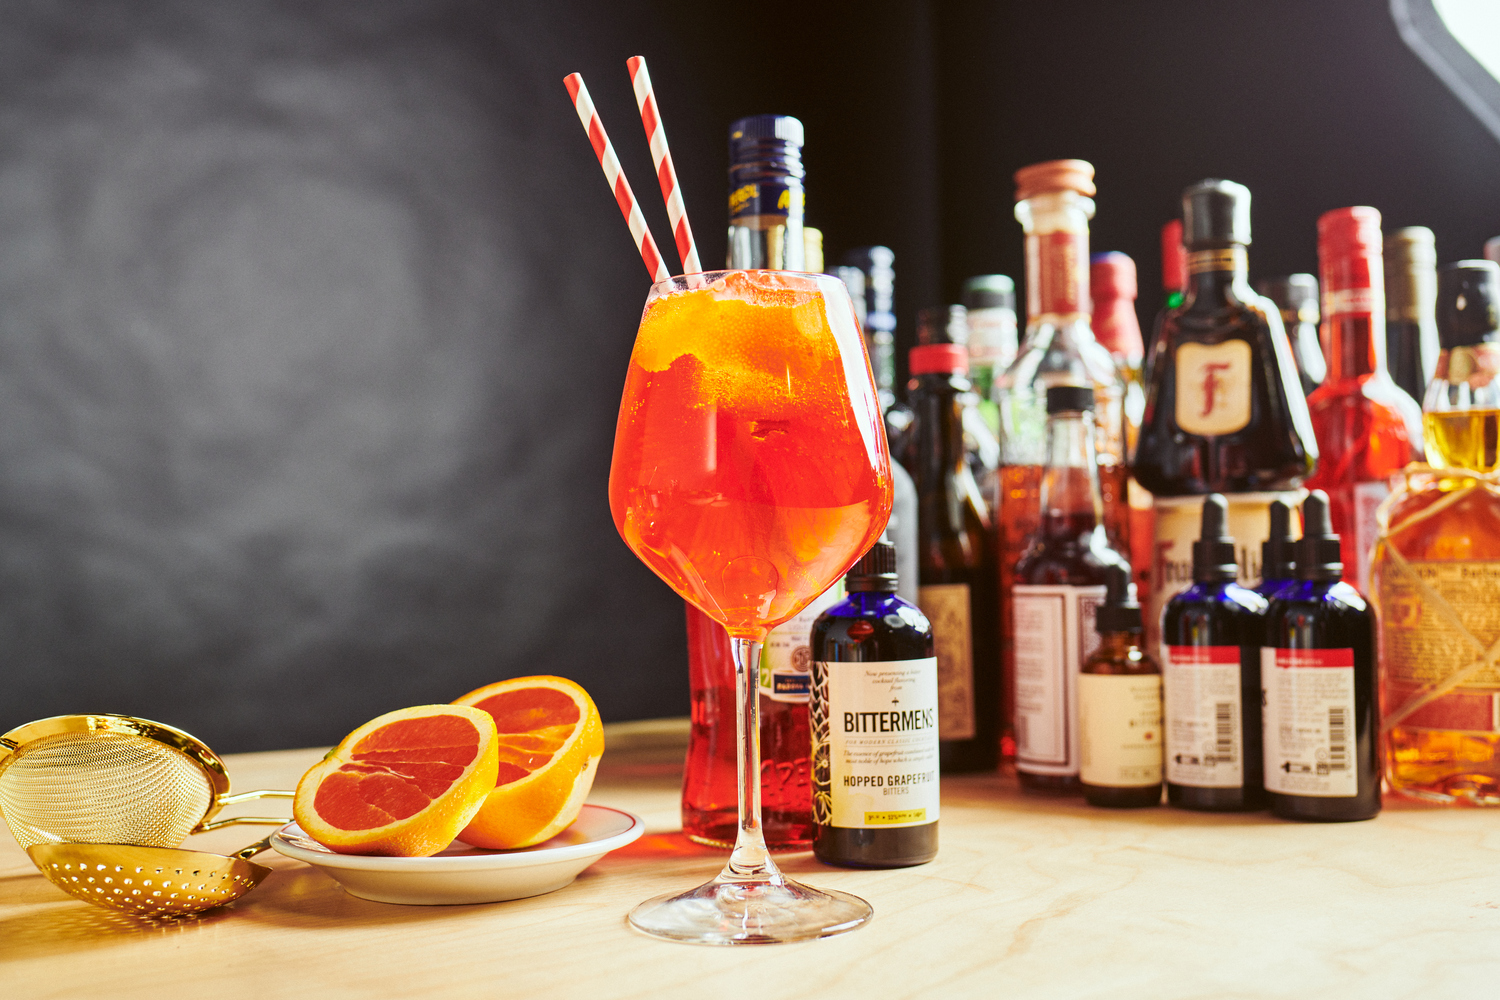 The Aperol spritz at Arthur & Sons, which opens May 23 in Bridgehampton. COURTESY ARTHUR & SONS